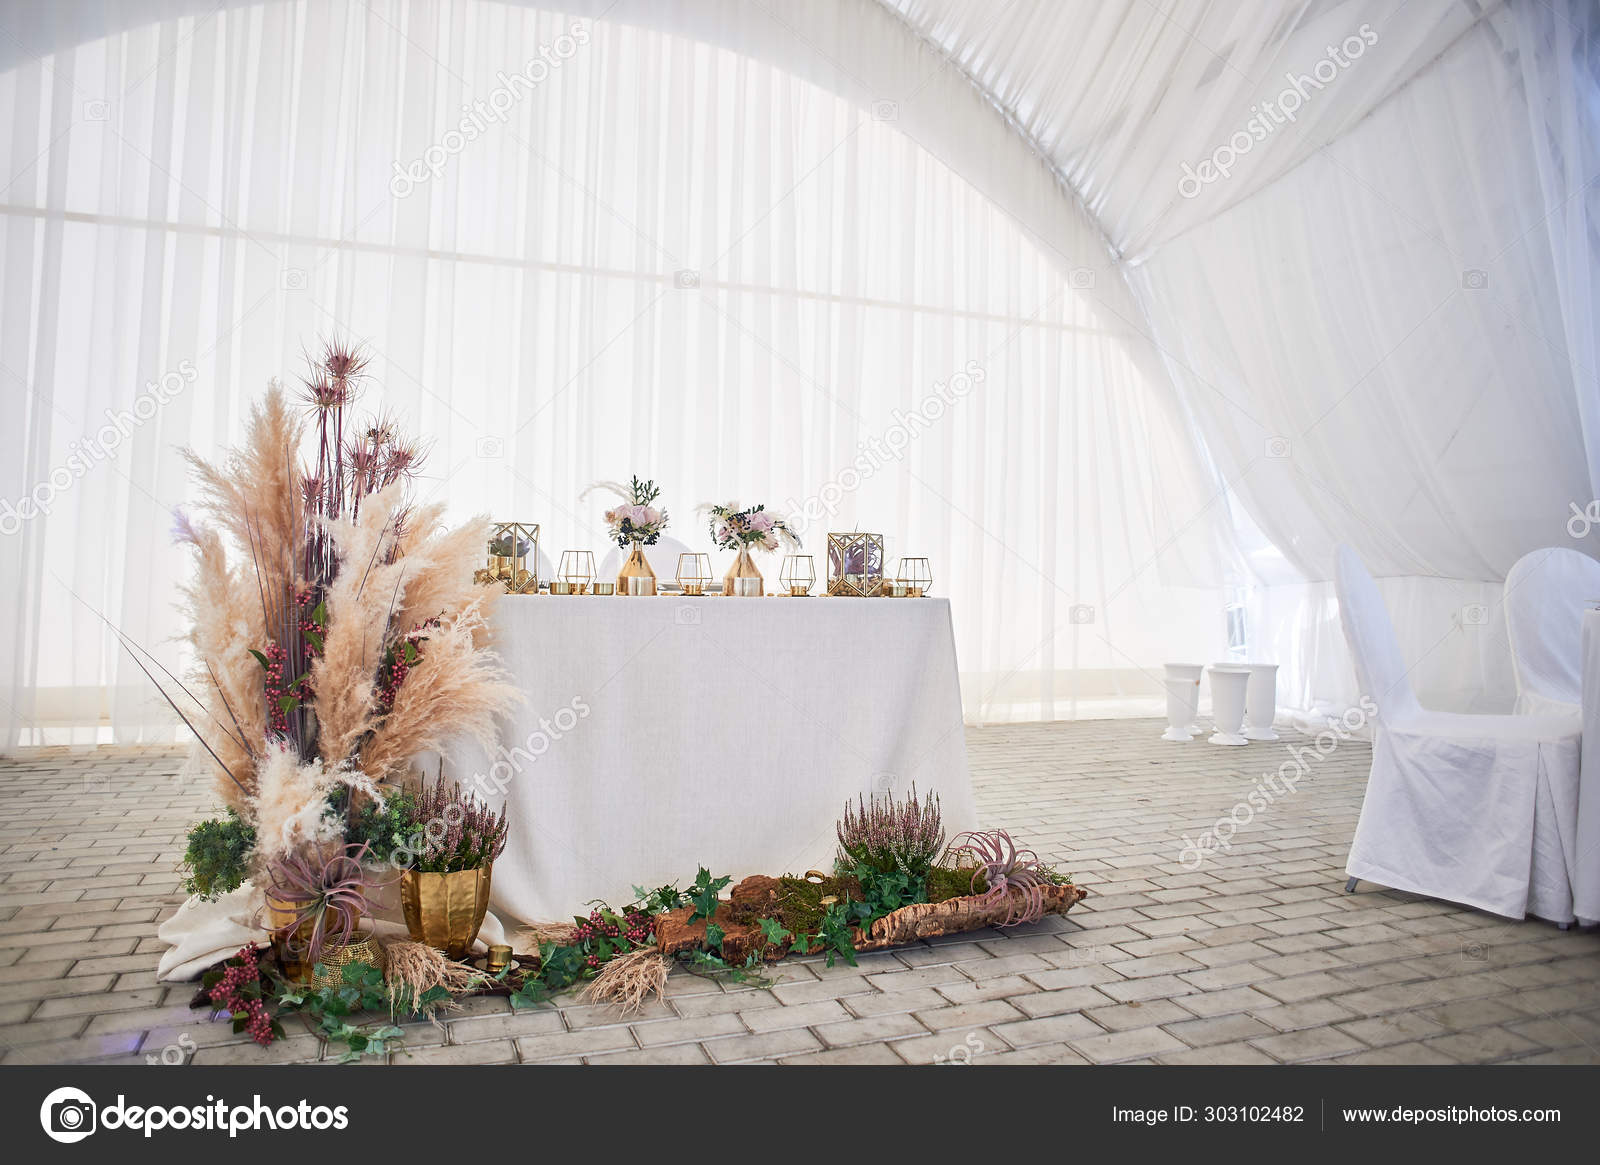 Wedding Decoration In Boho Style Light Colors In The Tent